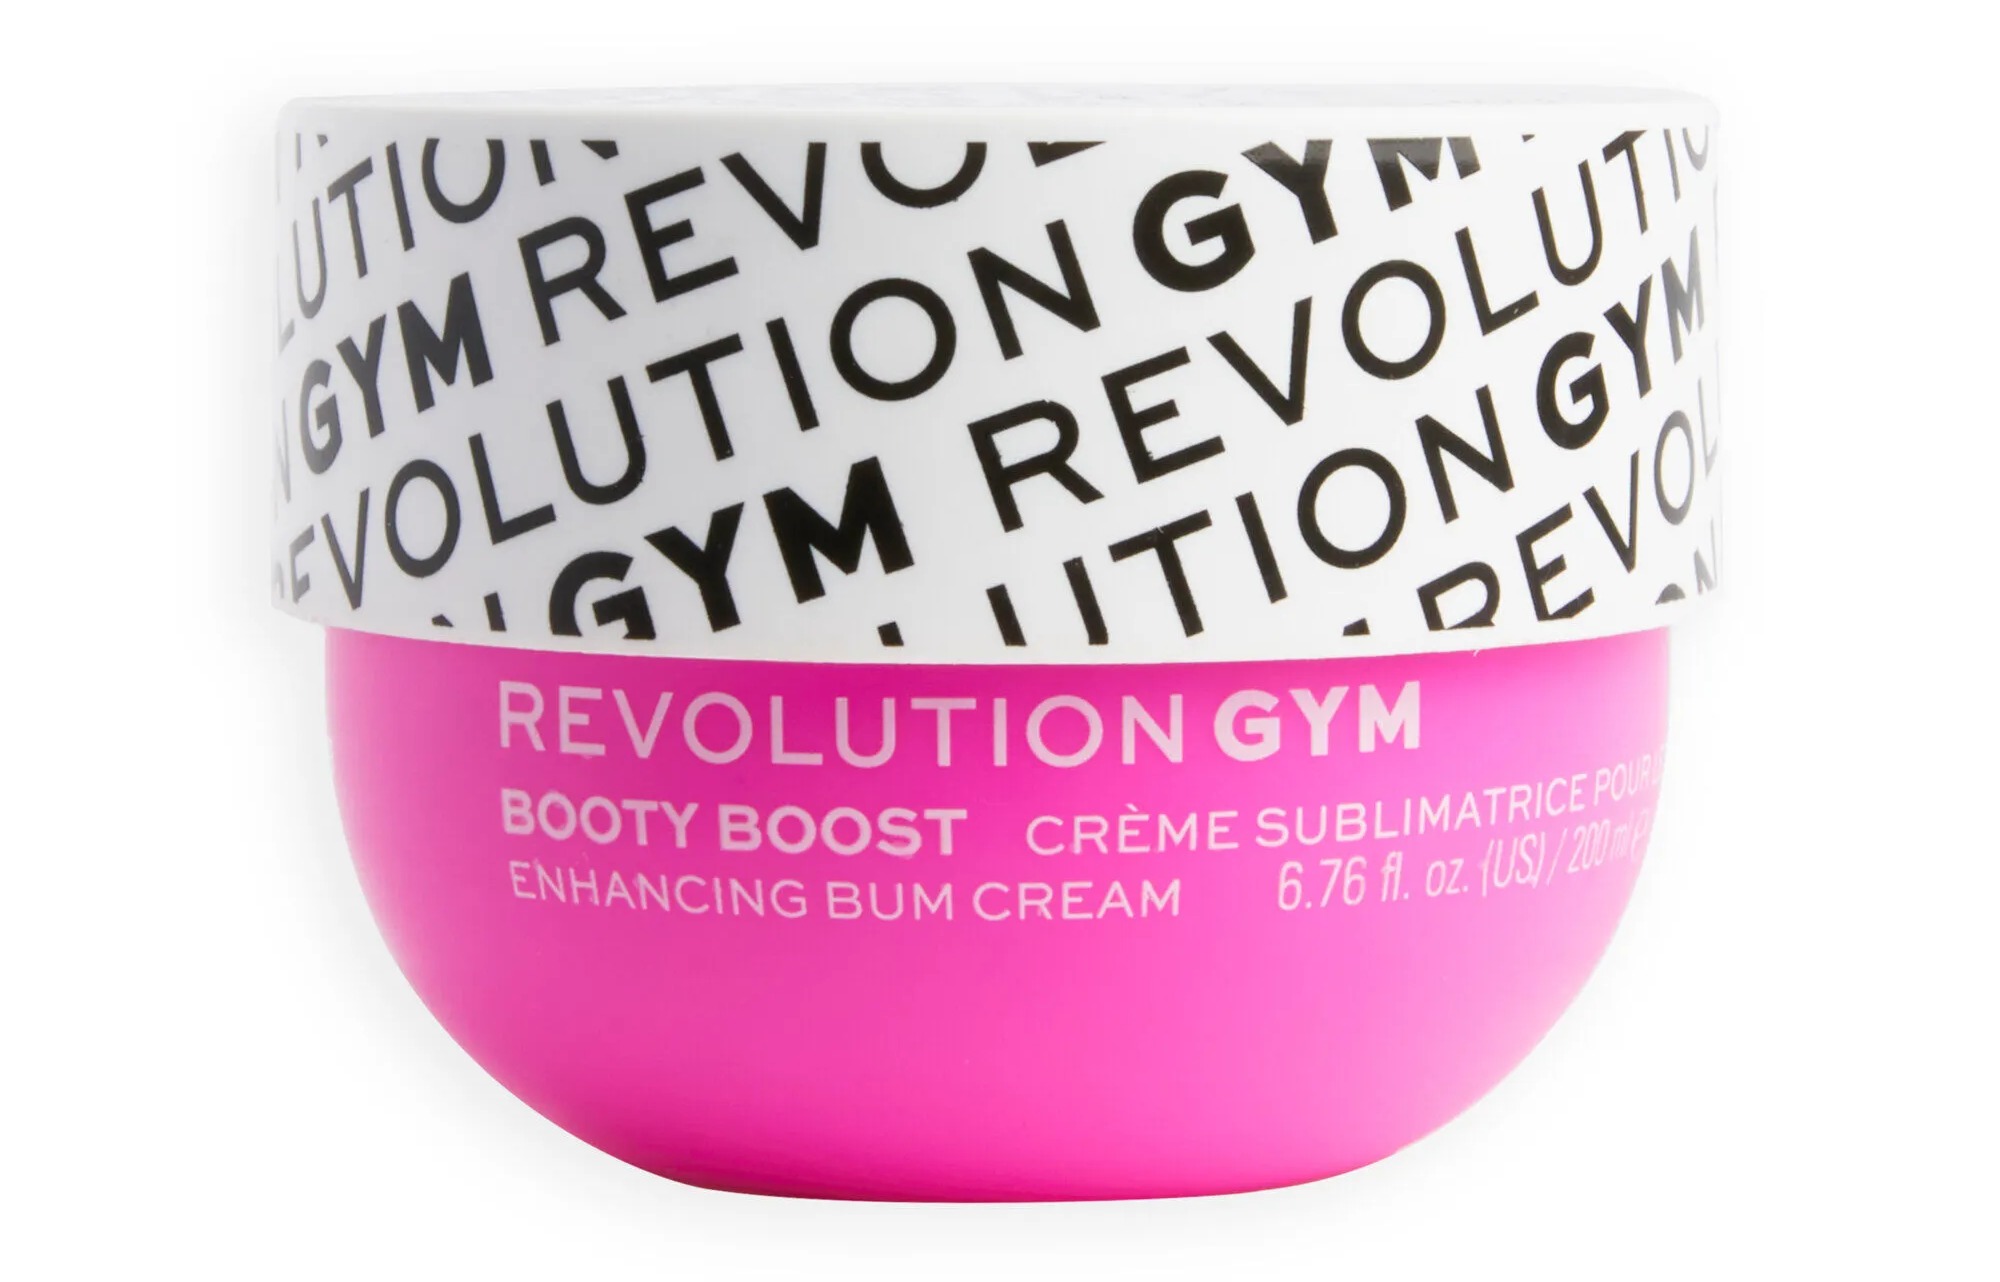 But Revolution’s Booty Boost Cream is just £5 from RevolutionBeauty.com